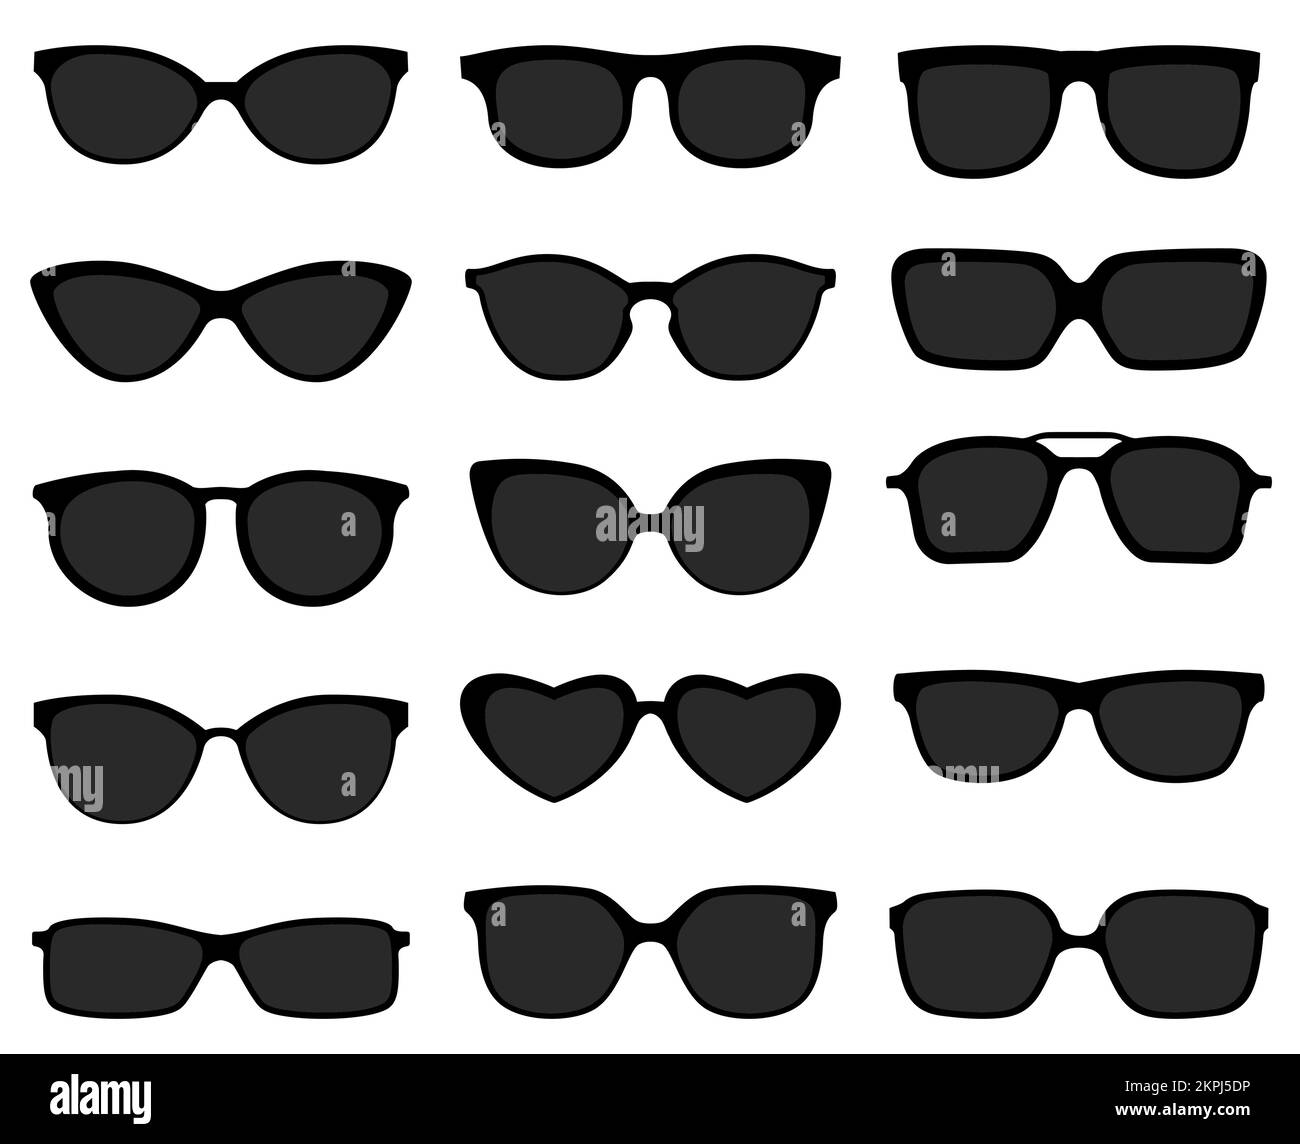 Black sunglasses icon set. Dark optic glasses and frames isolated on white. Back lens with stylish plastic rims of different shapes as oval, square an Stock Vector